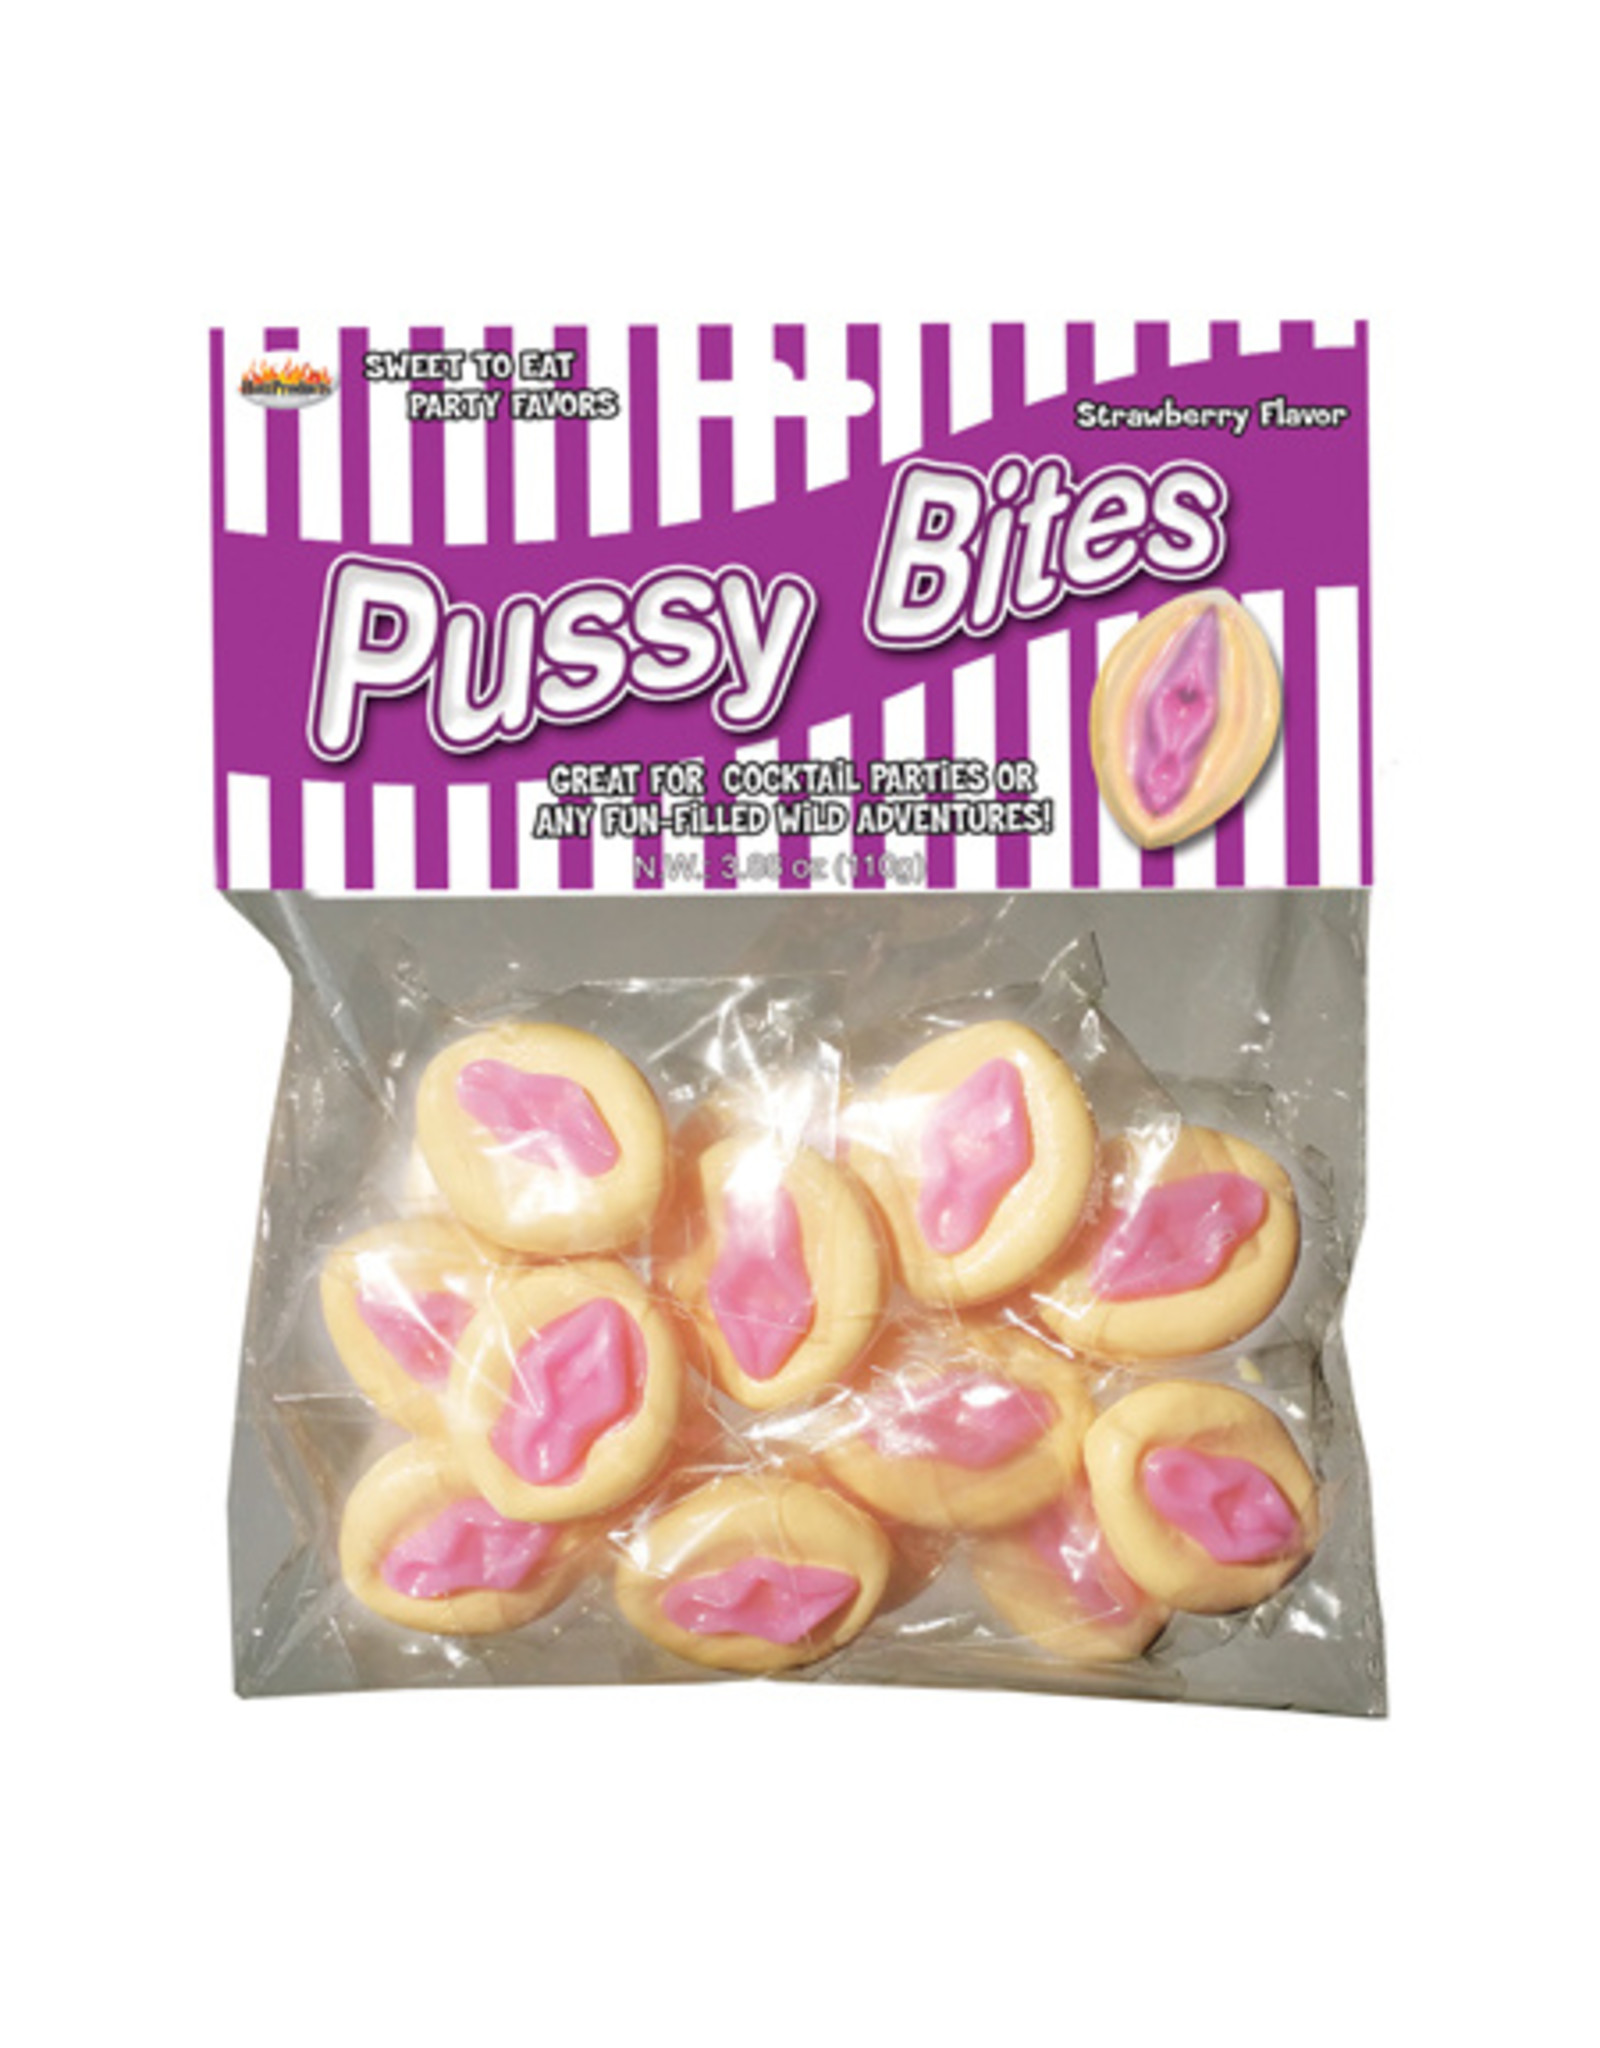 Hott Products Pussy Bites Strawberry Flavor